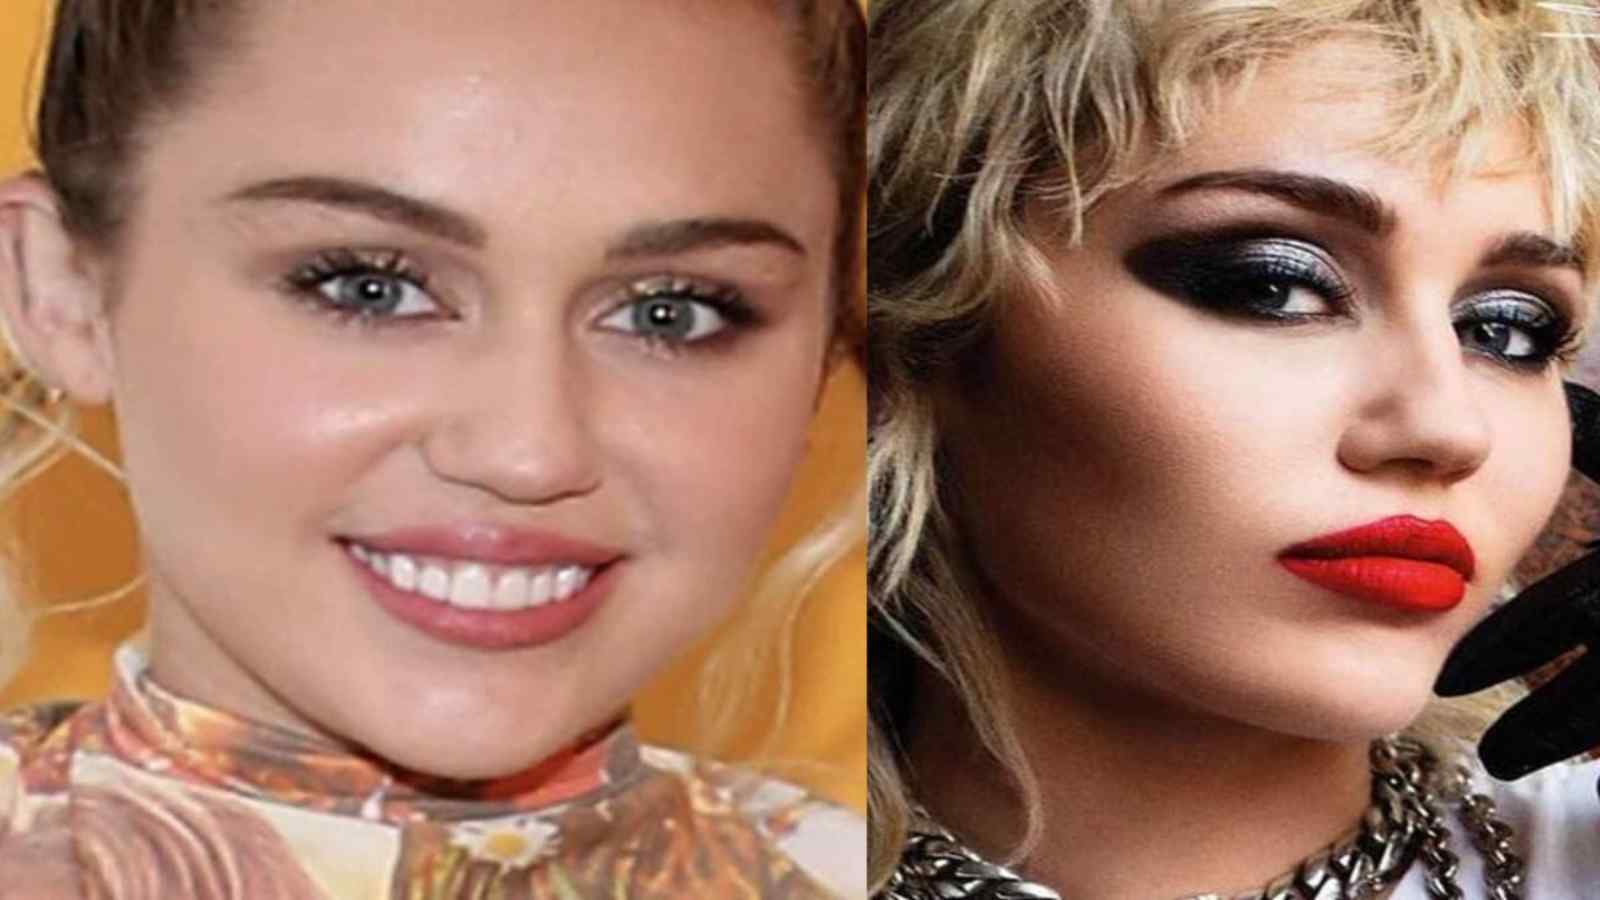 Miley Cyrus Plastic Surgery Rumors: What is the Truth?